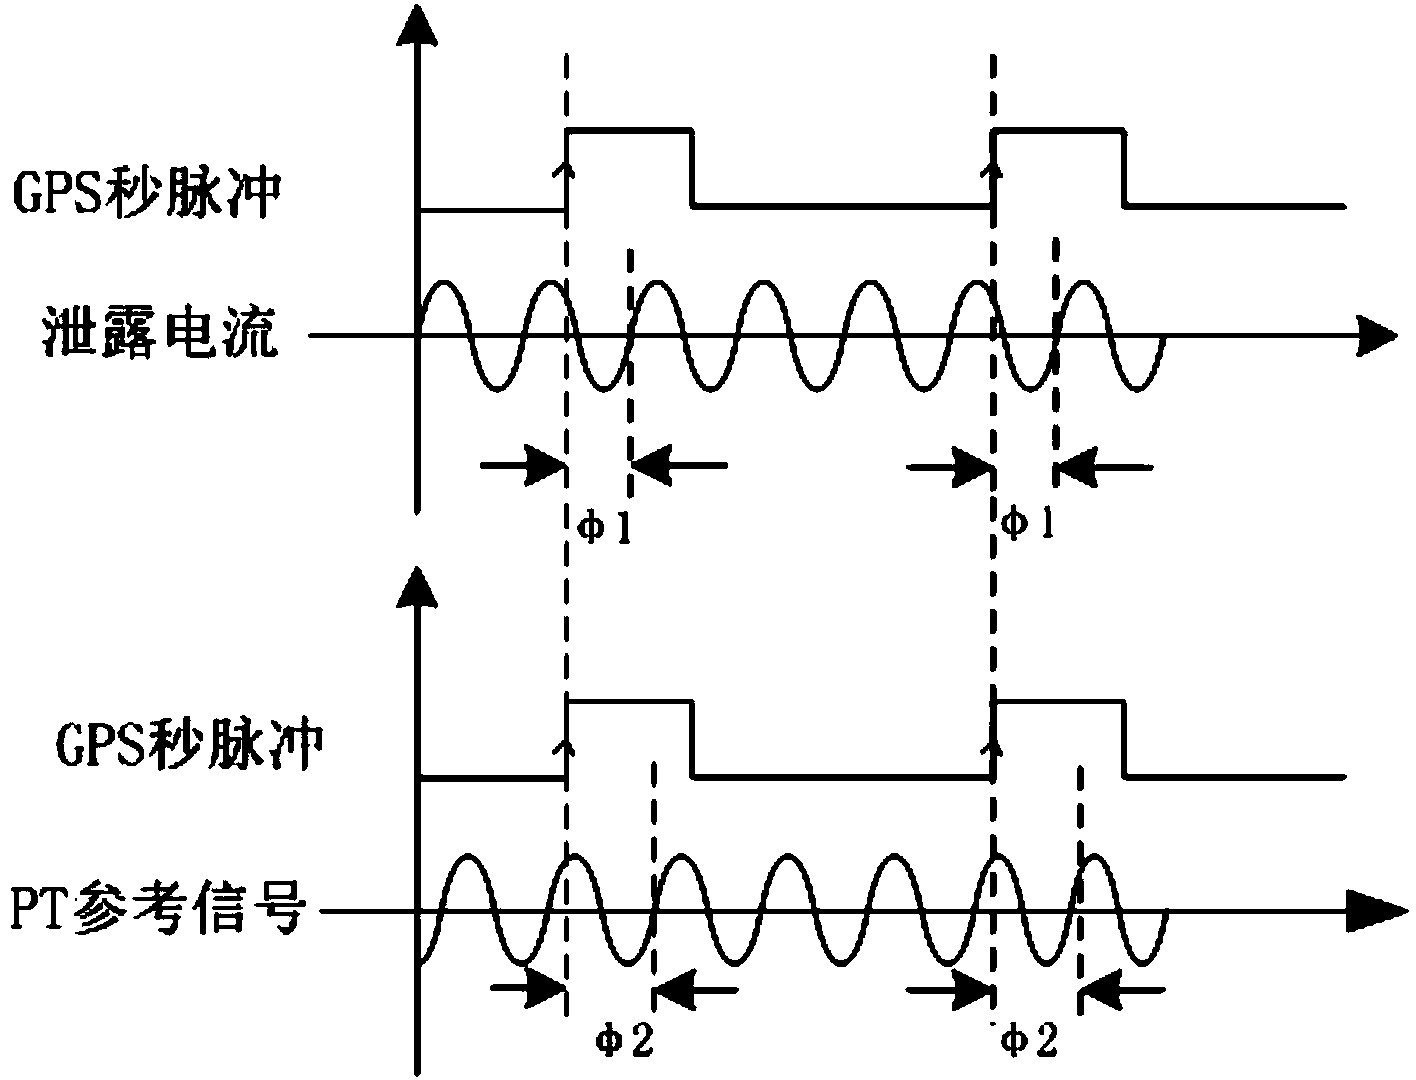 Arrester resistive current monitoring method and device based on GPS synchronization pulse per second